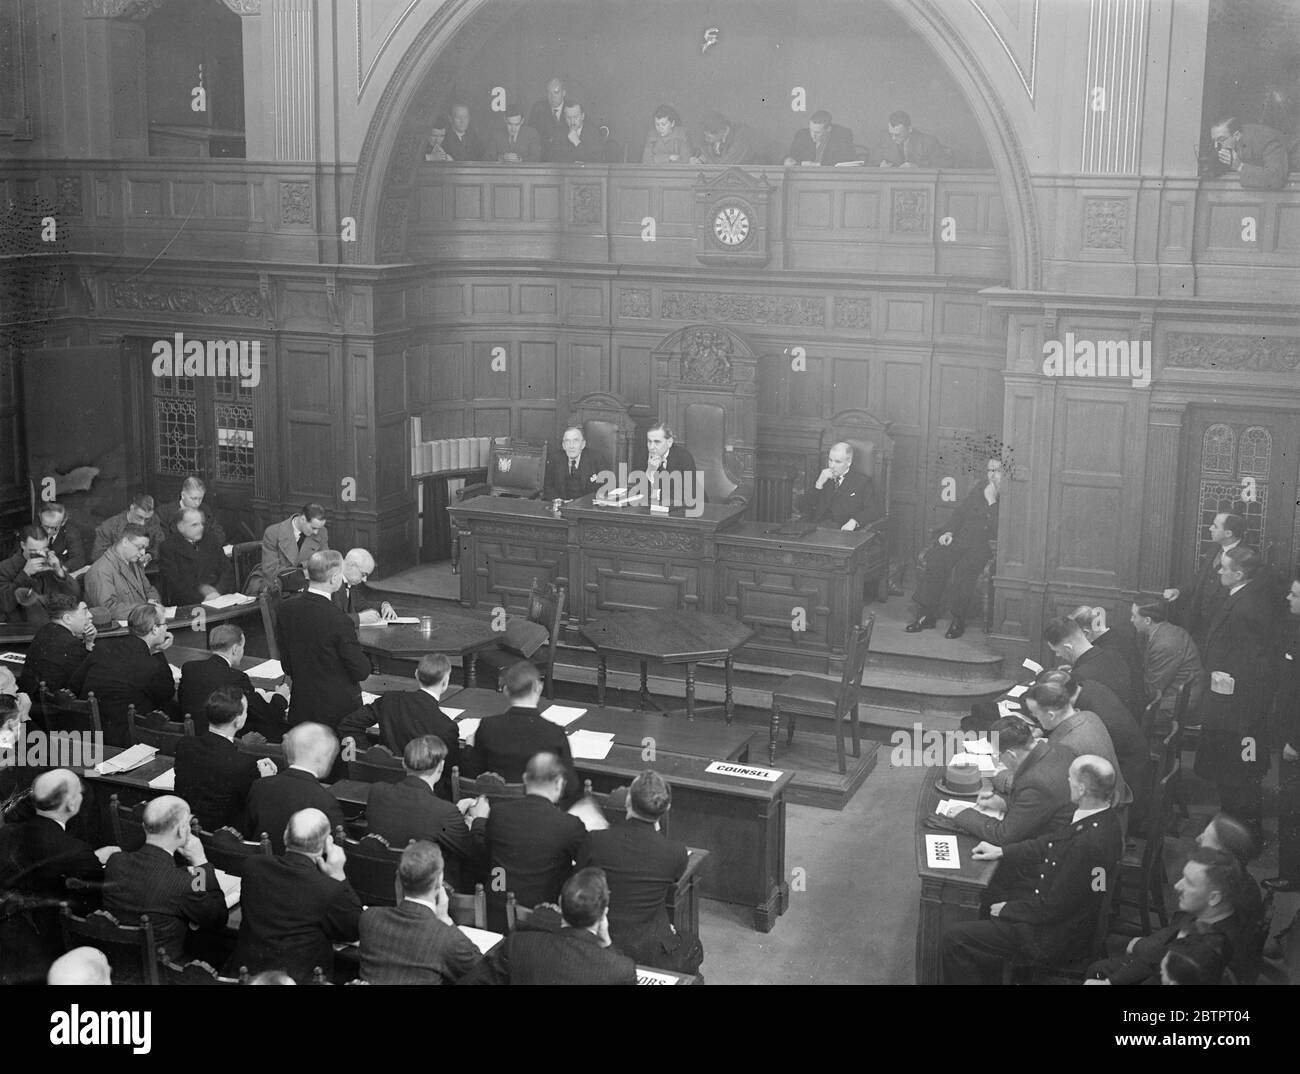 Croydon typhoid enquiry opens. Inquiry into the Croydon typhoid epidemic has opened a Croydon Town Hall. Sir Walter Monckton, KC, is appearing for the Croydon Borough Council and Mr PM Sandiands, KC for the Croydon medical officer. Photo shows, a general view of the inquiry with MrH L Murphy and, KC and the two assessors presiding. 6 December 1937 Stock Photo